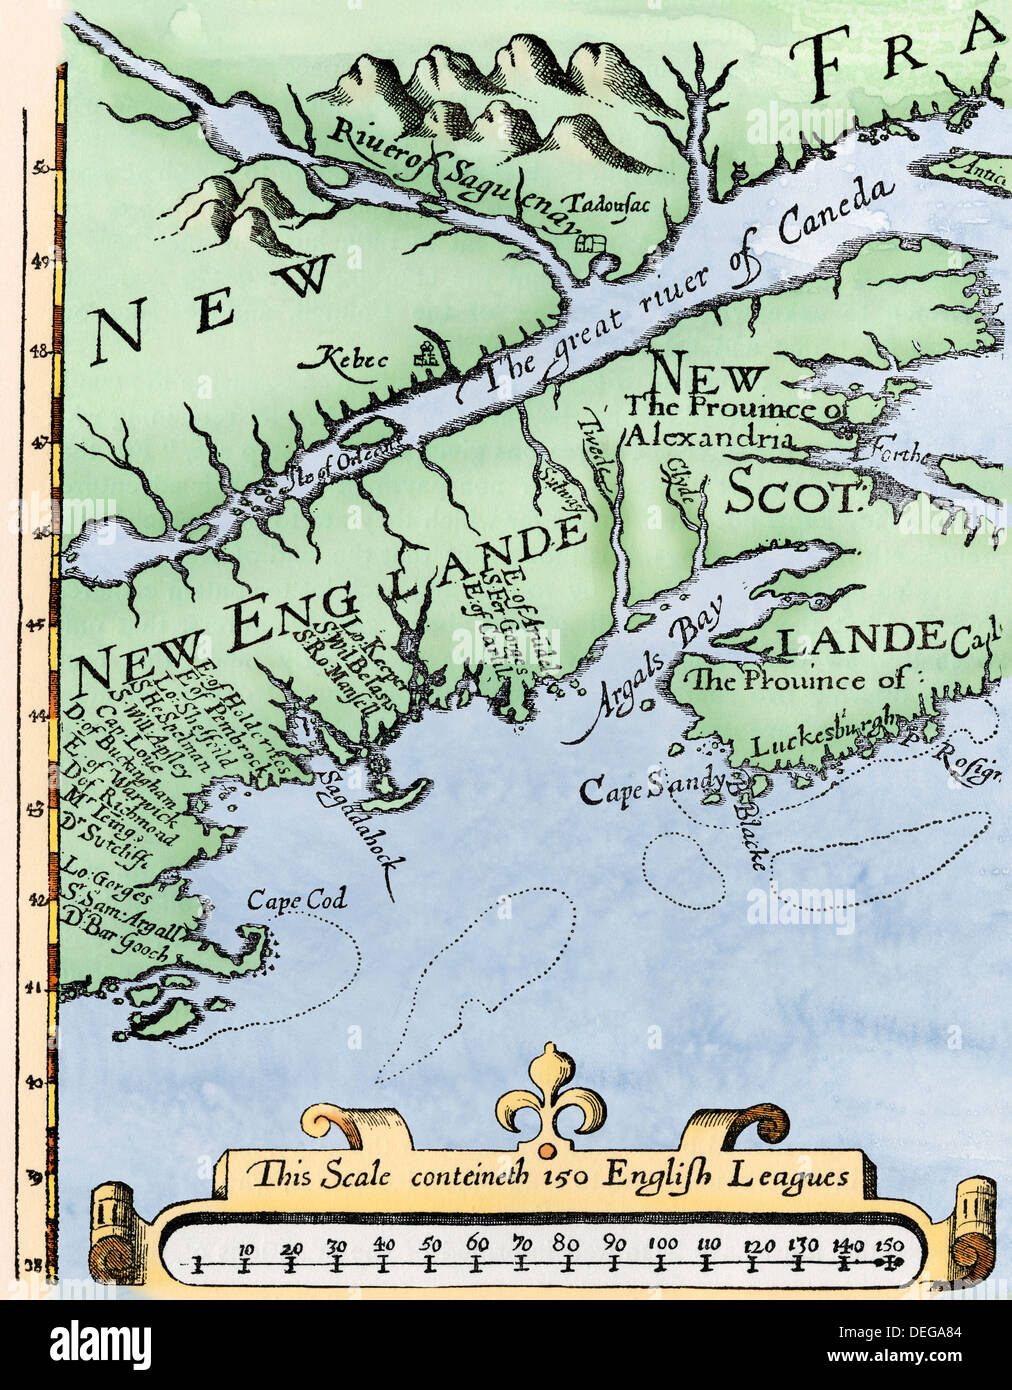 Alexander's map of the north Atlantic coast of New England and Nova Scotia, 1624. Hand-colored woodcut Stock Photo